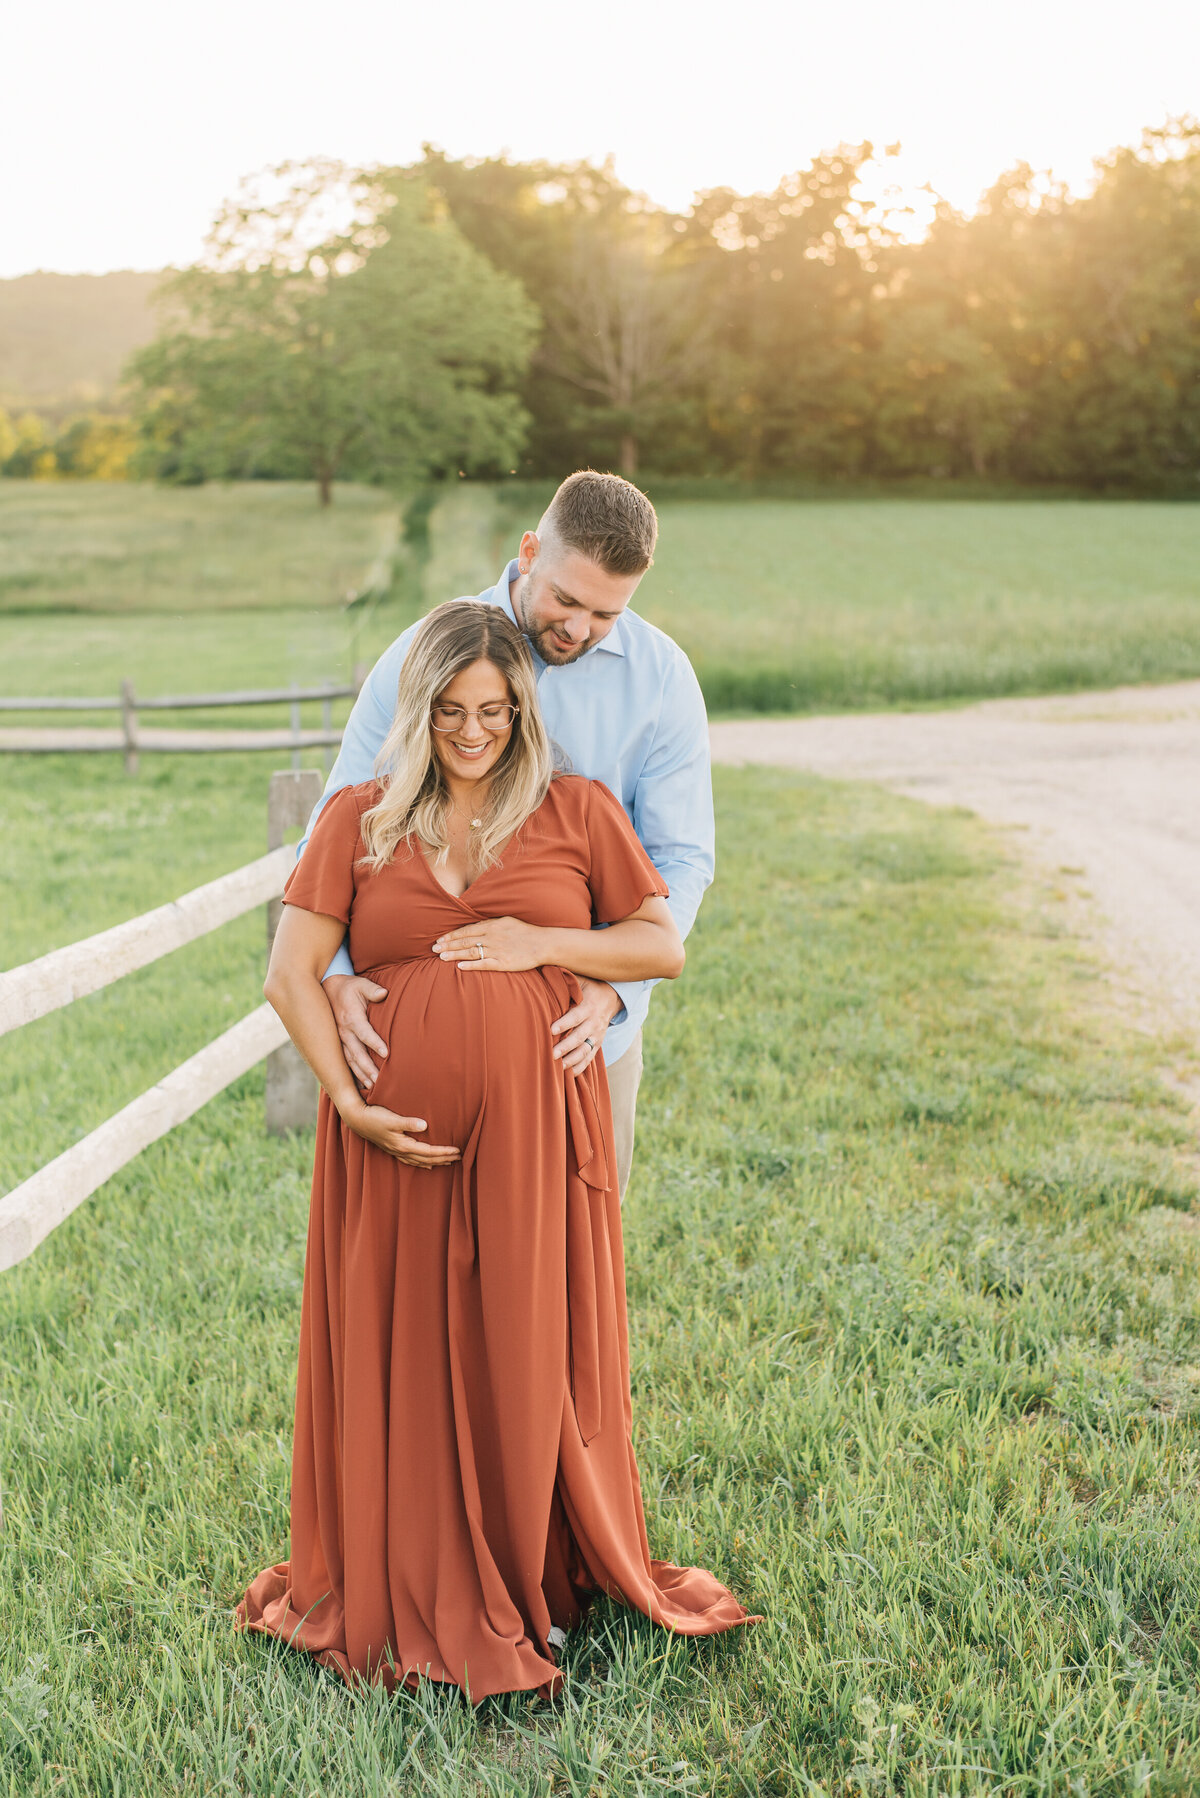 Expecting mom and dad, smiling down at baby in field at sunset